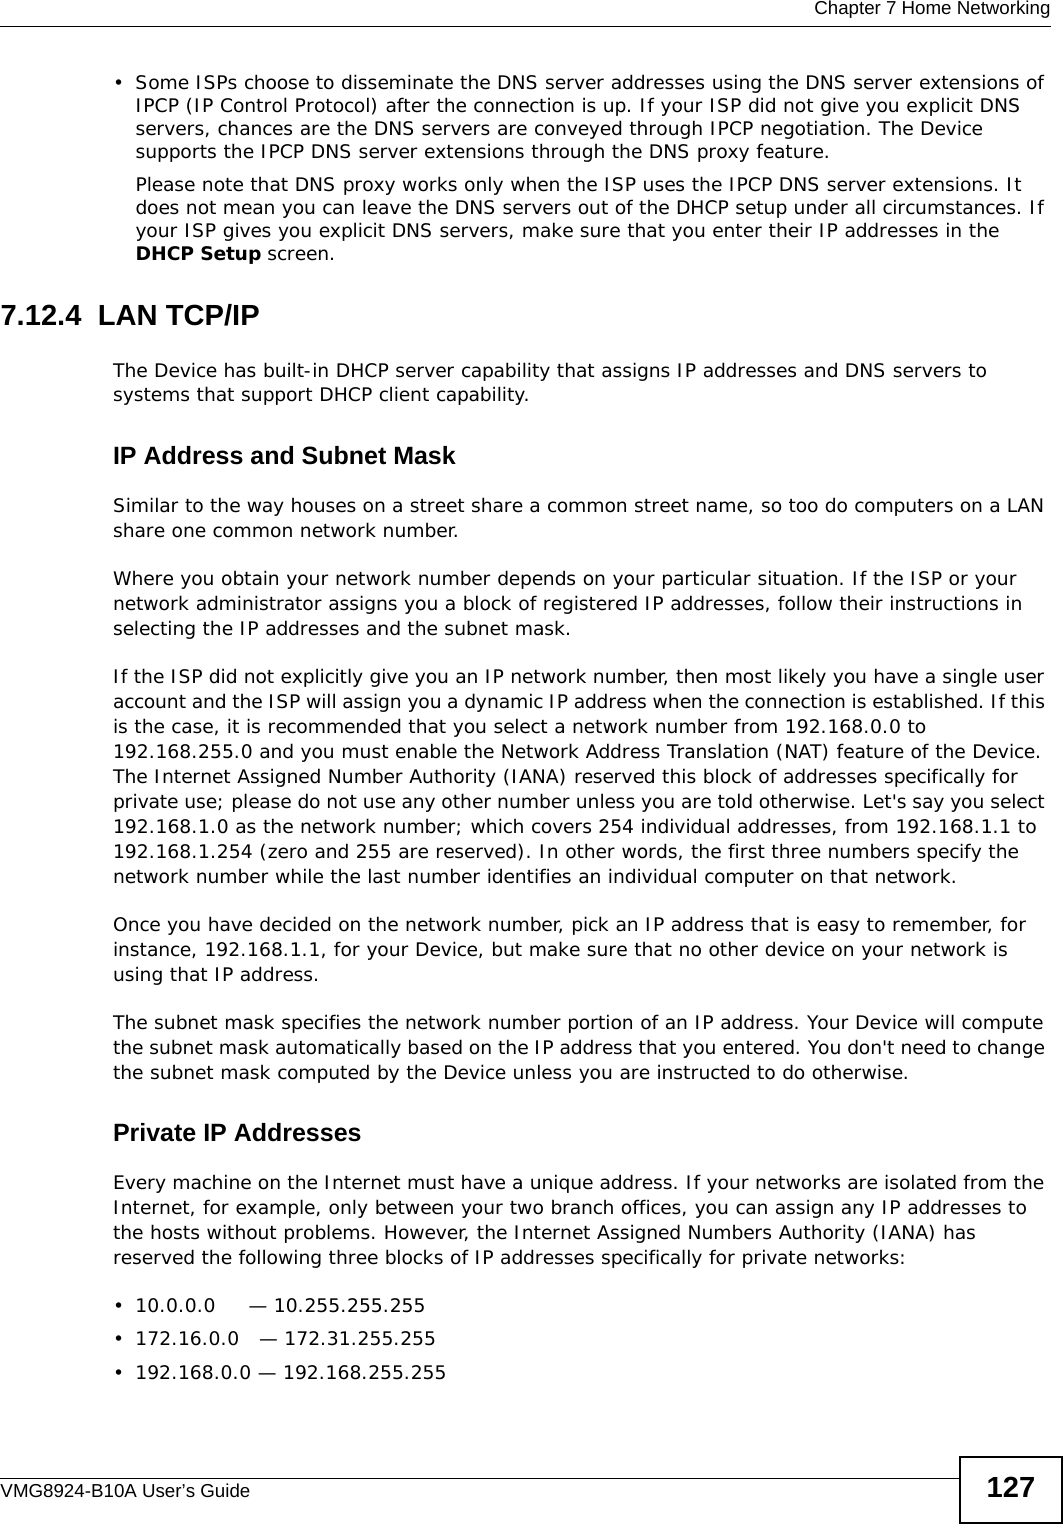  Chapter 7 Home NetworkingVMG8924-B10A User’s Guide 127• Some ISPs choose to disseminate the DNS server addresses using the DNS server extensions of IPCP (IP Control Protocol) after the connection is up. If your ISP did not give you explicit DNS servers, chances are the DNS servers are conveyed through IPCP negotiation. The Device supports the IPCP DNS server extensions through the DNS proxy feature.Please note that DNS proxy works only when the ISP uses the IPCP DNS server extensions. It does not mean you can leave the DNS servers out of the DHCP setup under all circumstances. If your ISP gives you explicit DNS servers, make sure that you enter their IP addresses in the DHCP Setup screen.7.12.4  LAN TCP/IP The Device has built-in DHCP server capability that assigns IP addresses and DNS servers to systems that support DHCP client capability.IP Address and Subnet MaskSimilar to the way houses on a street share a common street name, so too do computers on a LAN share one common network number.Where you obtain your network number depends on your particular situation. If the ISP or your network administrator assigns you a block of registered IP addresses, follow their instructions in selecting the IP addresses and the subnet mask.If the ISP did not explicitly give you an IP network number, then most likely you have a single user account and the ISP will assign you a dynamic IP address when the connection is established. If this is the case, it is recommended that you select a network number from 192.168.0.0 to 192.168.255.0 and you must enable the Network Address Translation (NAT) feature of the Device. The Internet Assigned Number Authority (IANA) reserved this block of addresses specifically for private use; please do not use any other number unless you are told otherwise. Let&apos;s say you select 192.168.1.0 as the network number; which covers 254 individual addresses, from 192.168.1.1 to 192.168.1.254 (zero and 255 are reserved). In other words, the first three numbers specify the network number while the last number identifies an individual computer on that network.Once you have decided on the network number, pick an IP address that is easy to remember, for instance, 192.168.1.1, for your Device, but make sure that no other device on your network is using that IP address.The subnet mask specifies the network number portion of an IP address. Your Device will compute the subnet mask automatically based on the IP address that you entered. You don&apos;t need to change the subnet mask computed by the Device unless you are instructed to do otherwise.Private IP AddressesEvery machine on the Internet must have a unique address. If your networks are isolated from the Internet, for example, only between your two branch offices, you can assign any IP addresses to the hosts without problems. However, the Internet Assigned Numbers Authority (IANA) has reserved the following three blocks of IP addresses specifically for private networks:• 10.0.0.0     — 10.255.255.255• 172.16.0.0   — 172.31.255.255• 192.168.0.0 — 192.168.255.255